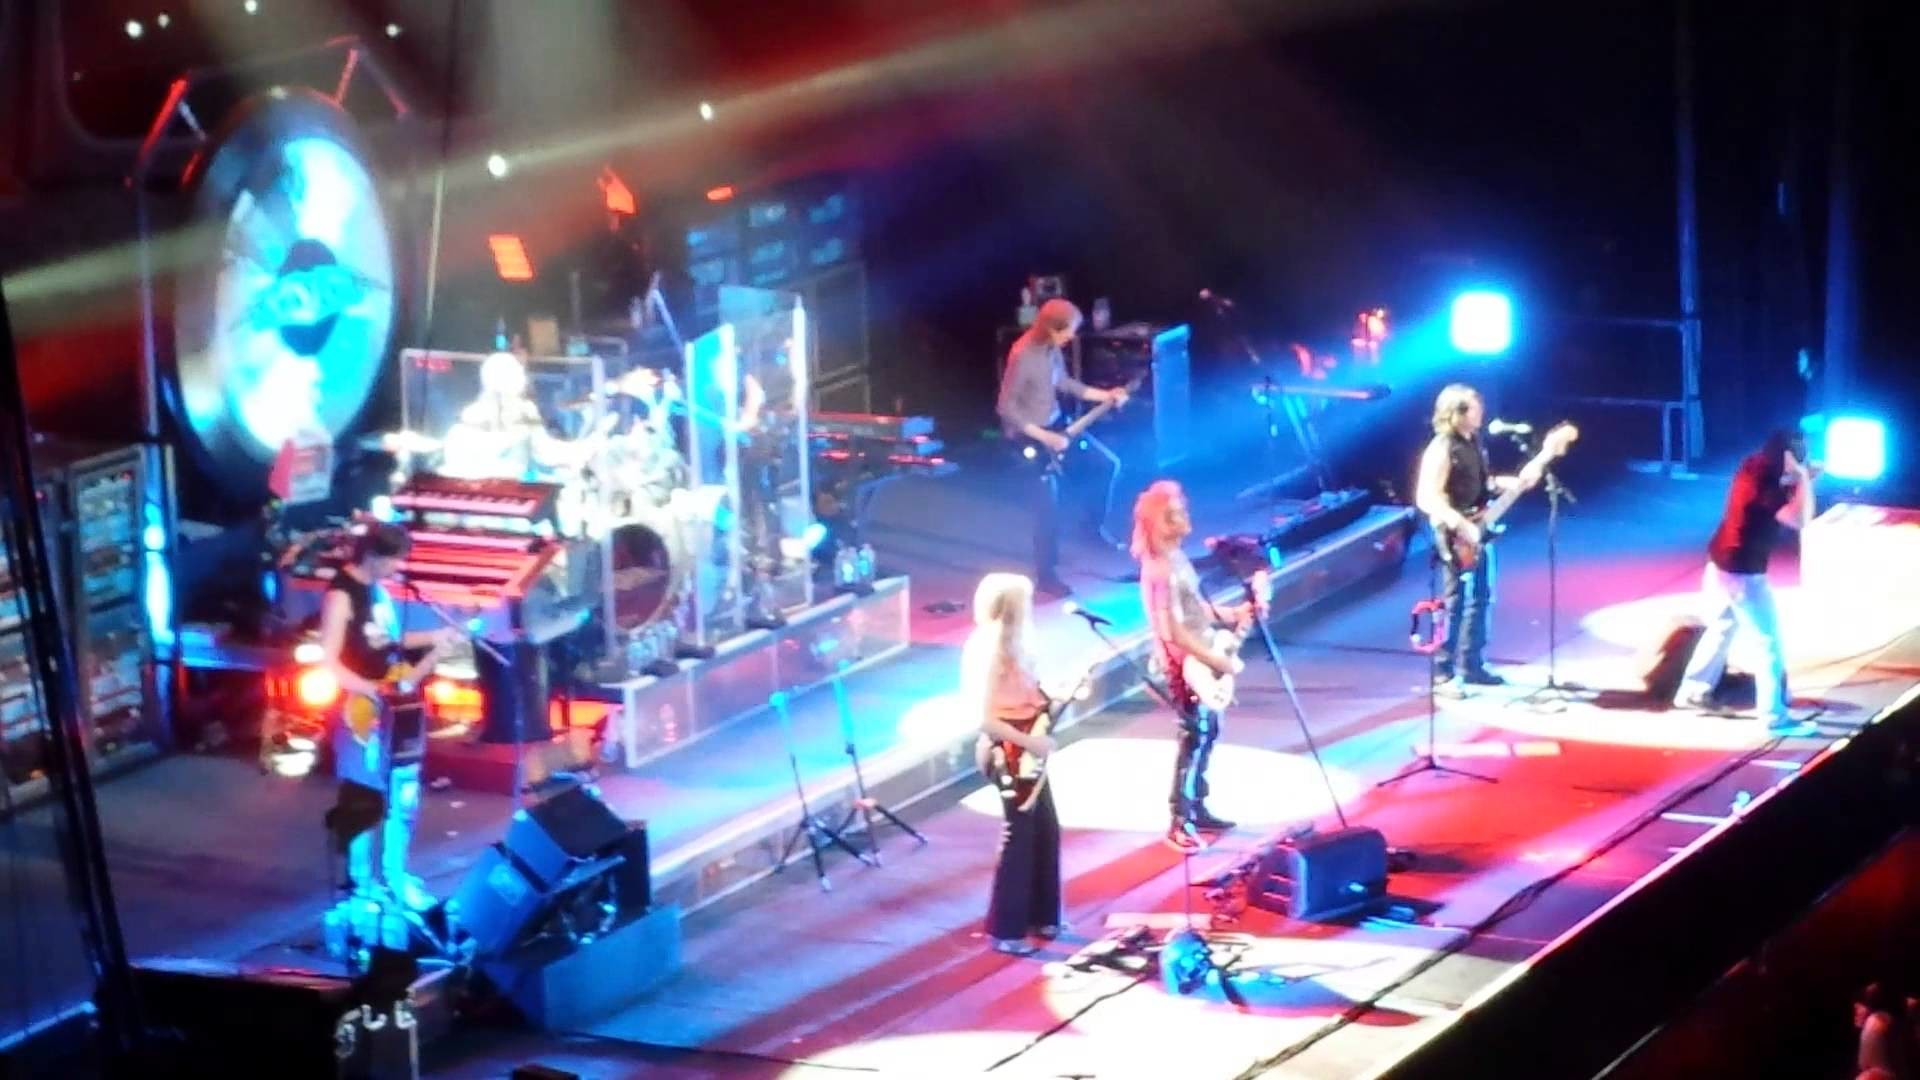 1920x1080 Boston Concert at Hard Rock Hollywood, FL - Rock and Roll Band - June 5,  2014